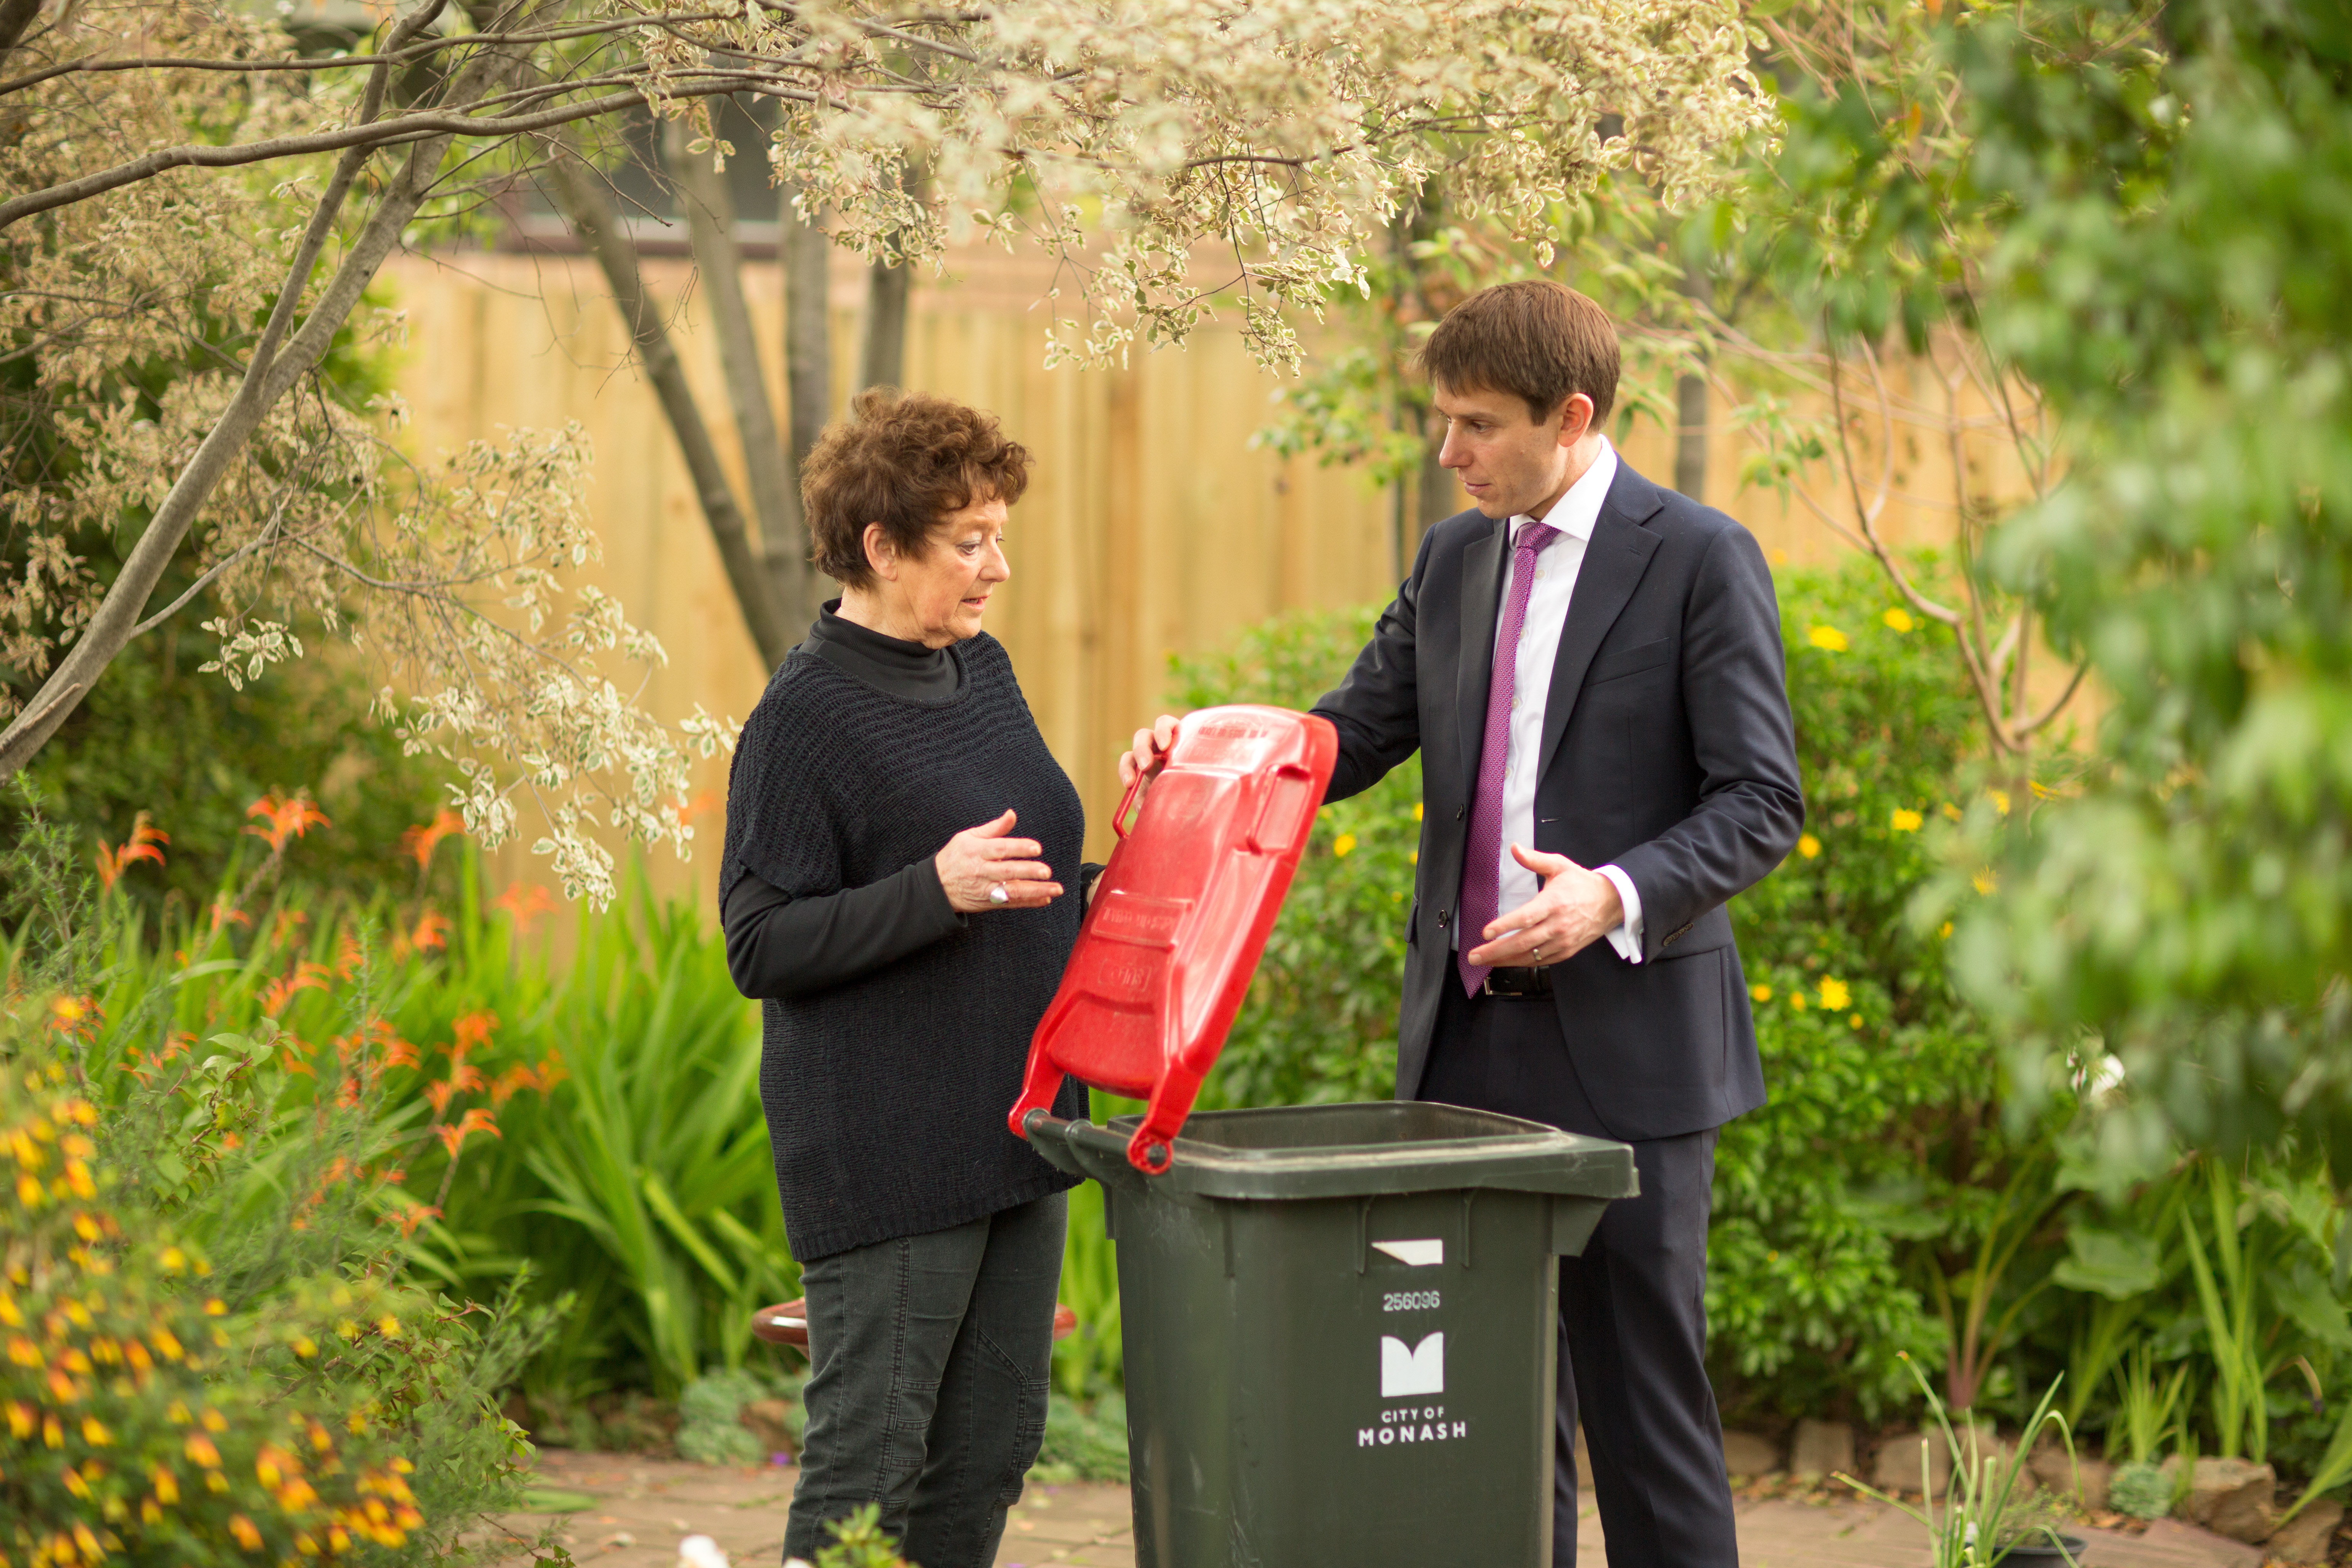 Fairer rates for people with no Council waste collection